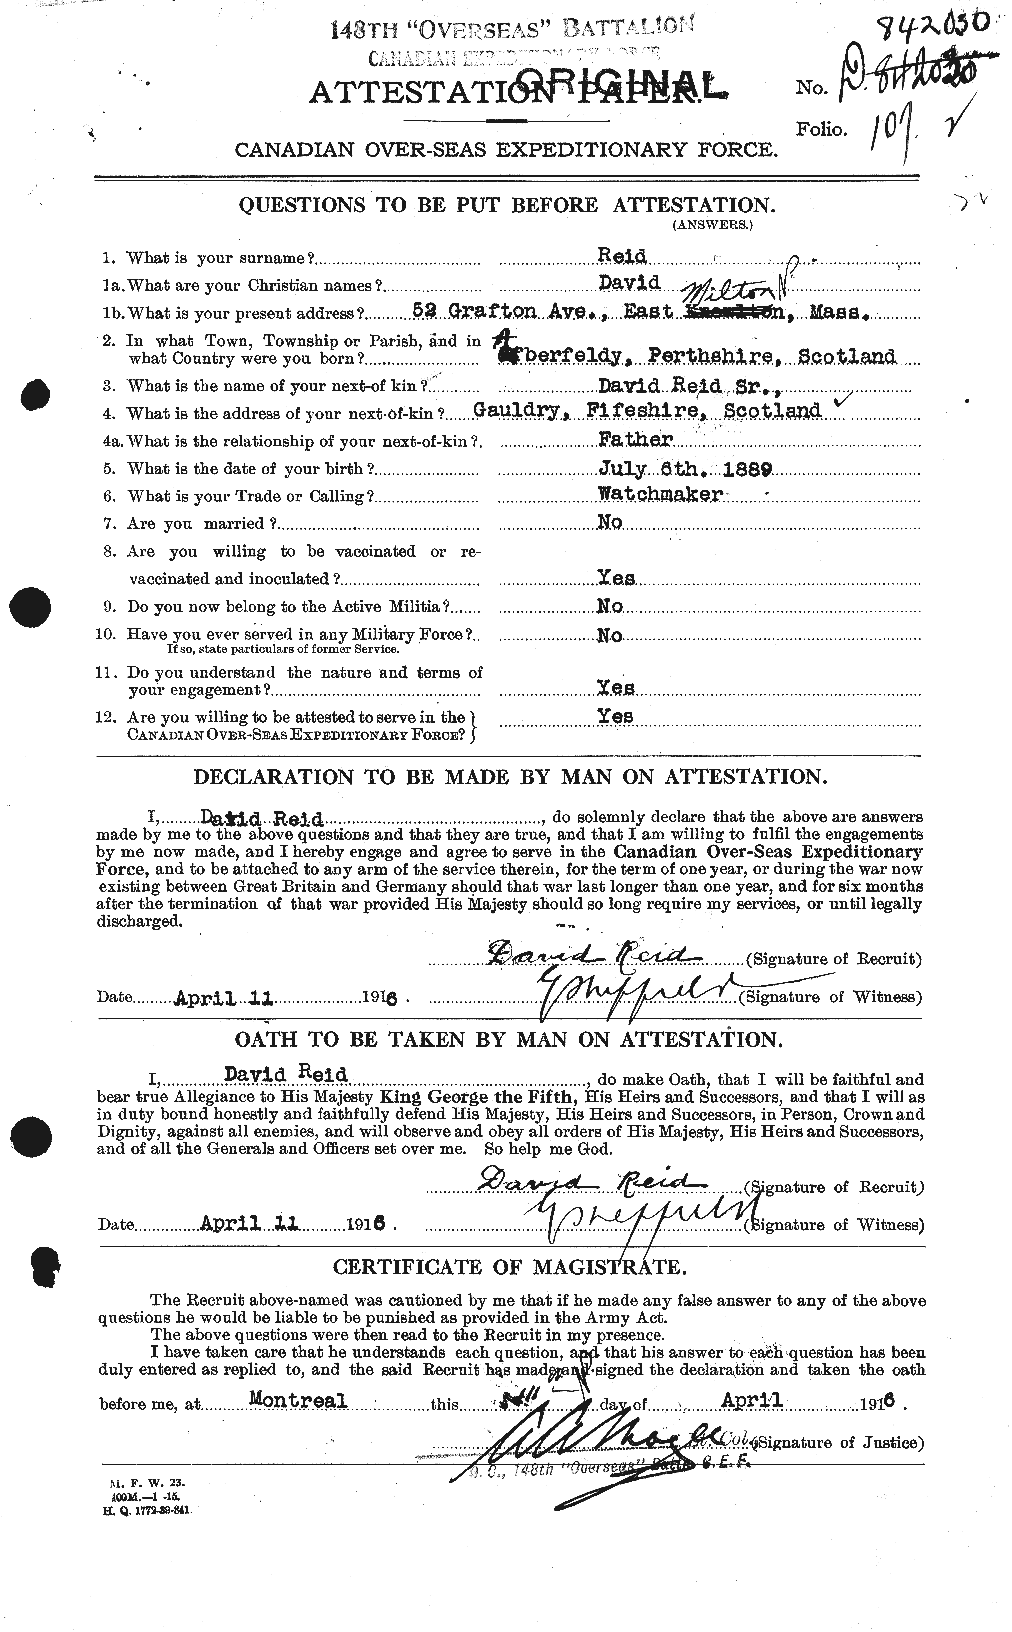 Personnel Records of the First World War - CEF 597933a